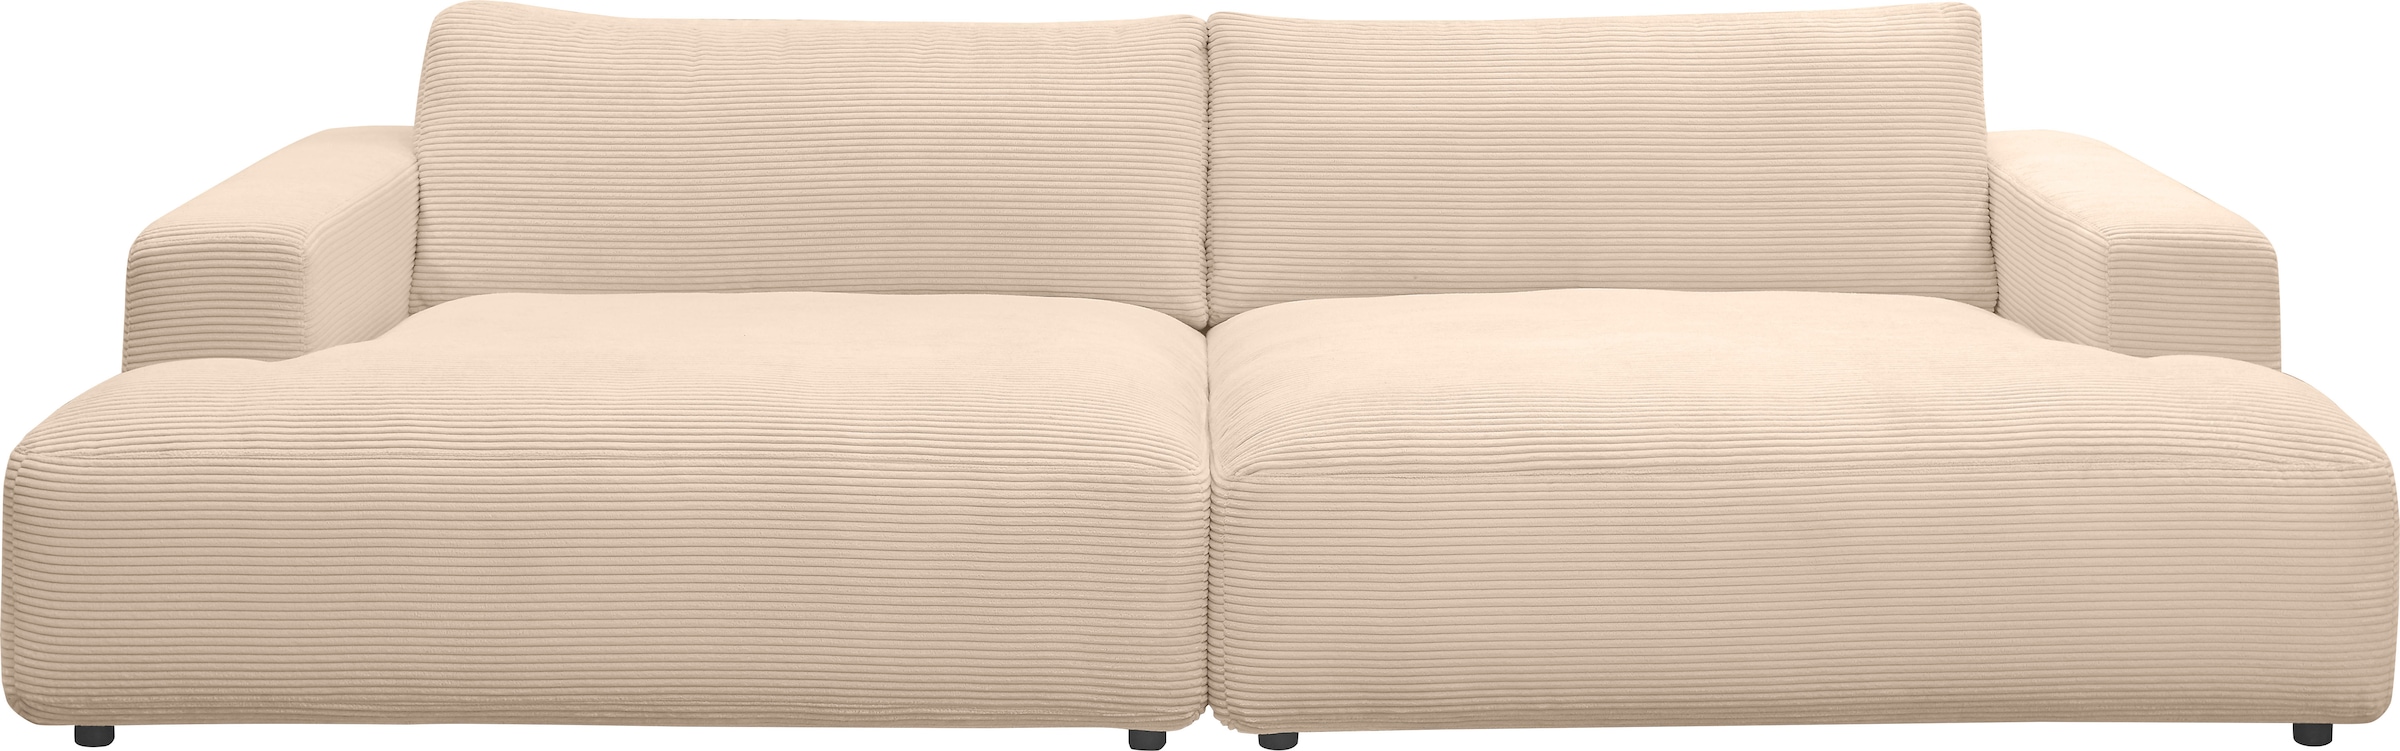 GALLERY M branded by Musterring kaufen cm Cord-Bezug, bequem Loungesofa Breite »Lucia«, 292